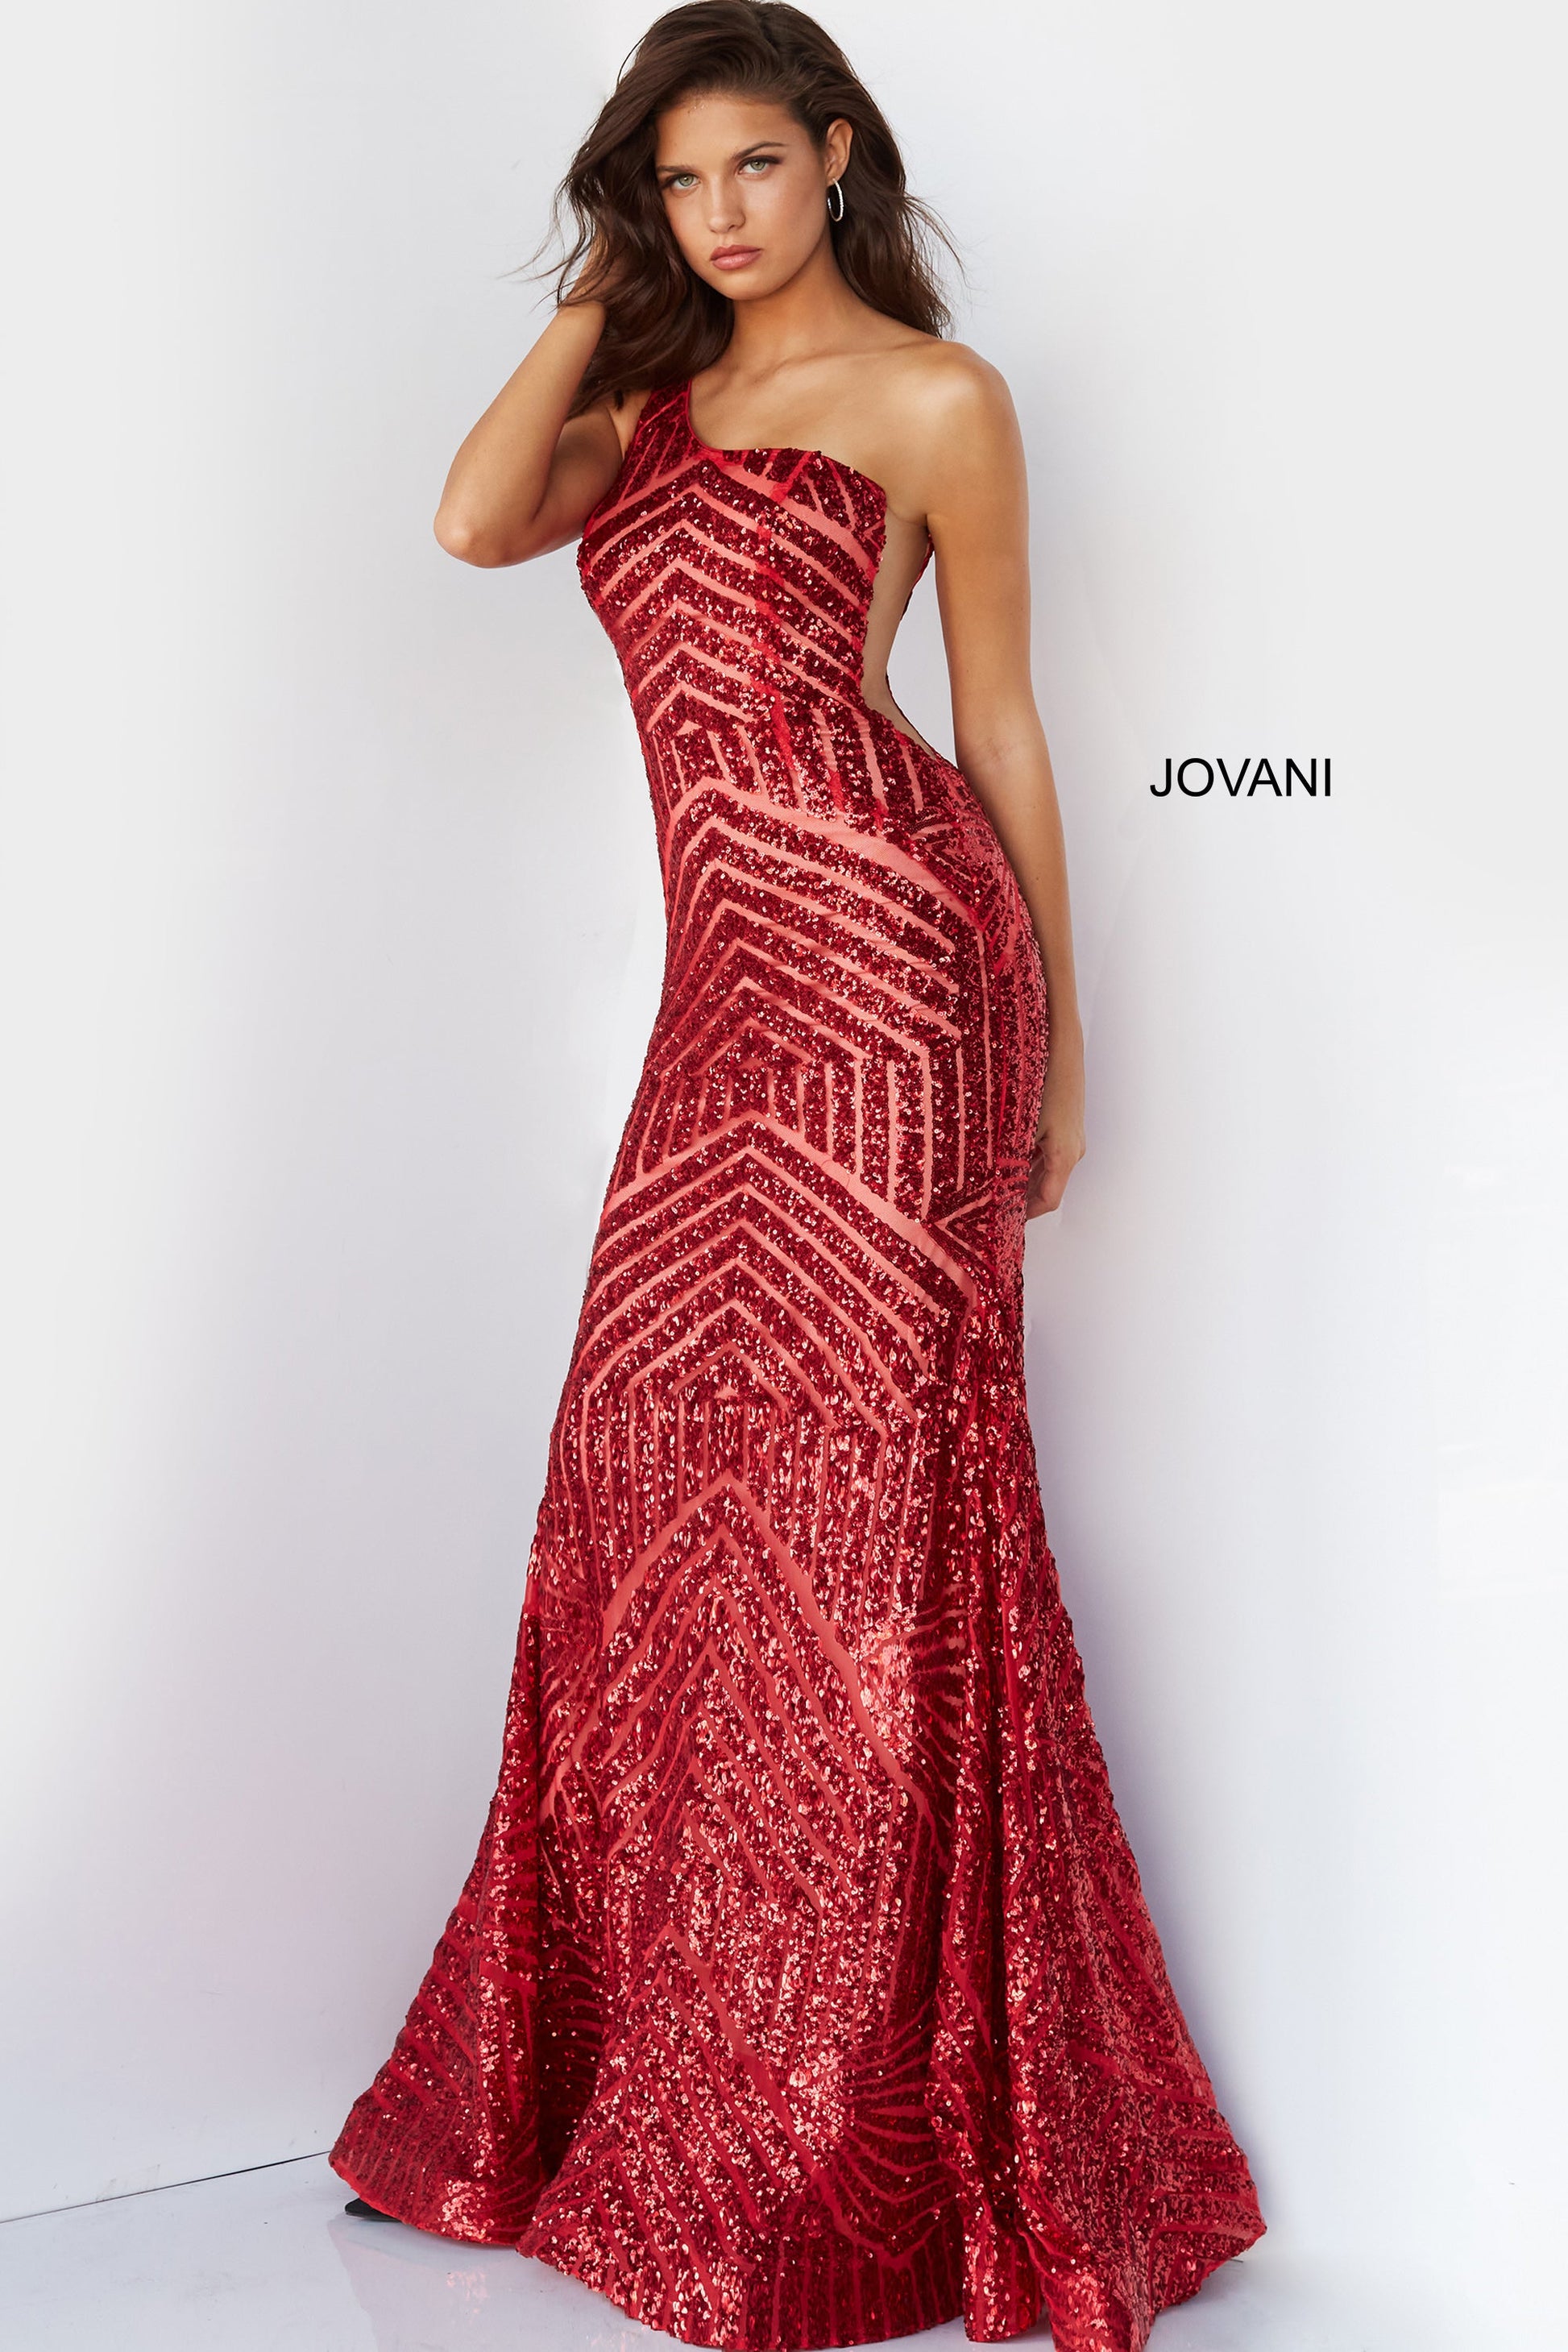 Jovani 06017 Long Mermaid Prom Pageant Gown Sequin One Shoulder Formal Sheer This Jovani 06017 red prom gown features a fit and flare silhouette in geometric sequins, detailed with a one-shoulder neckline and sheer plunging sides. Soft godets add volume to this glitter formal dress, finished with a horsehair hem and sweep train. Available Size-00-24  Available Color- Red, Purple, Blush, Neon Hot Pink